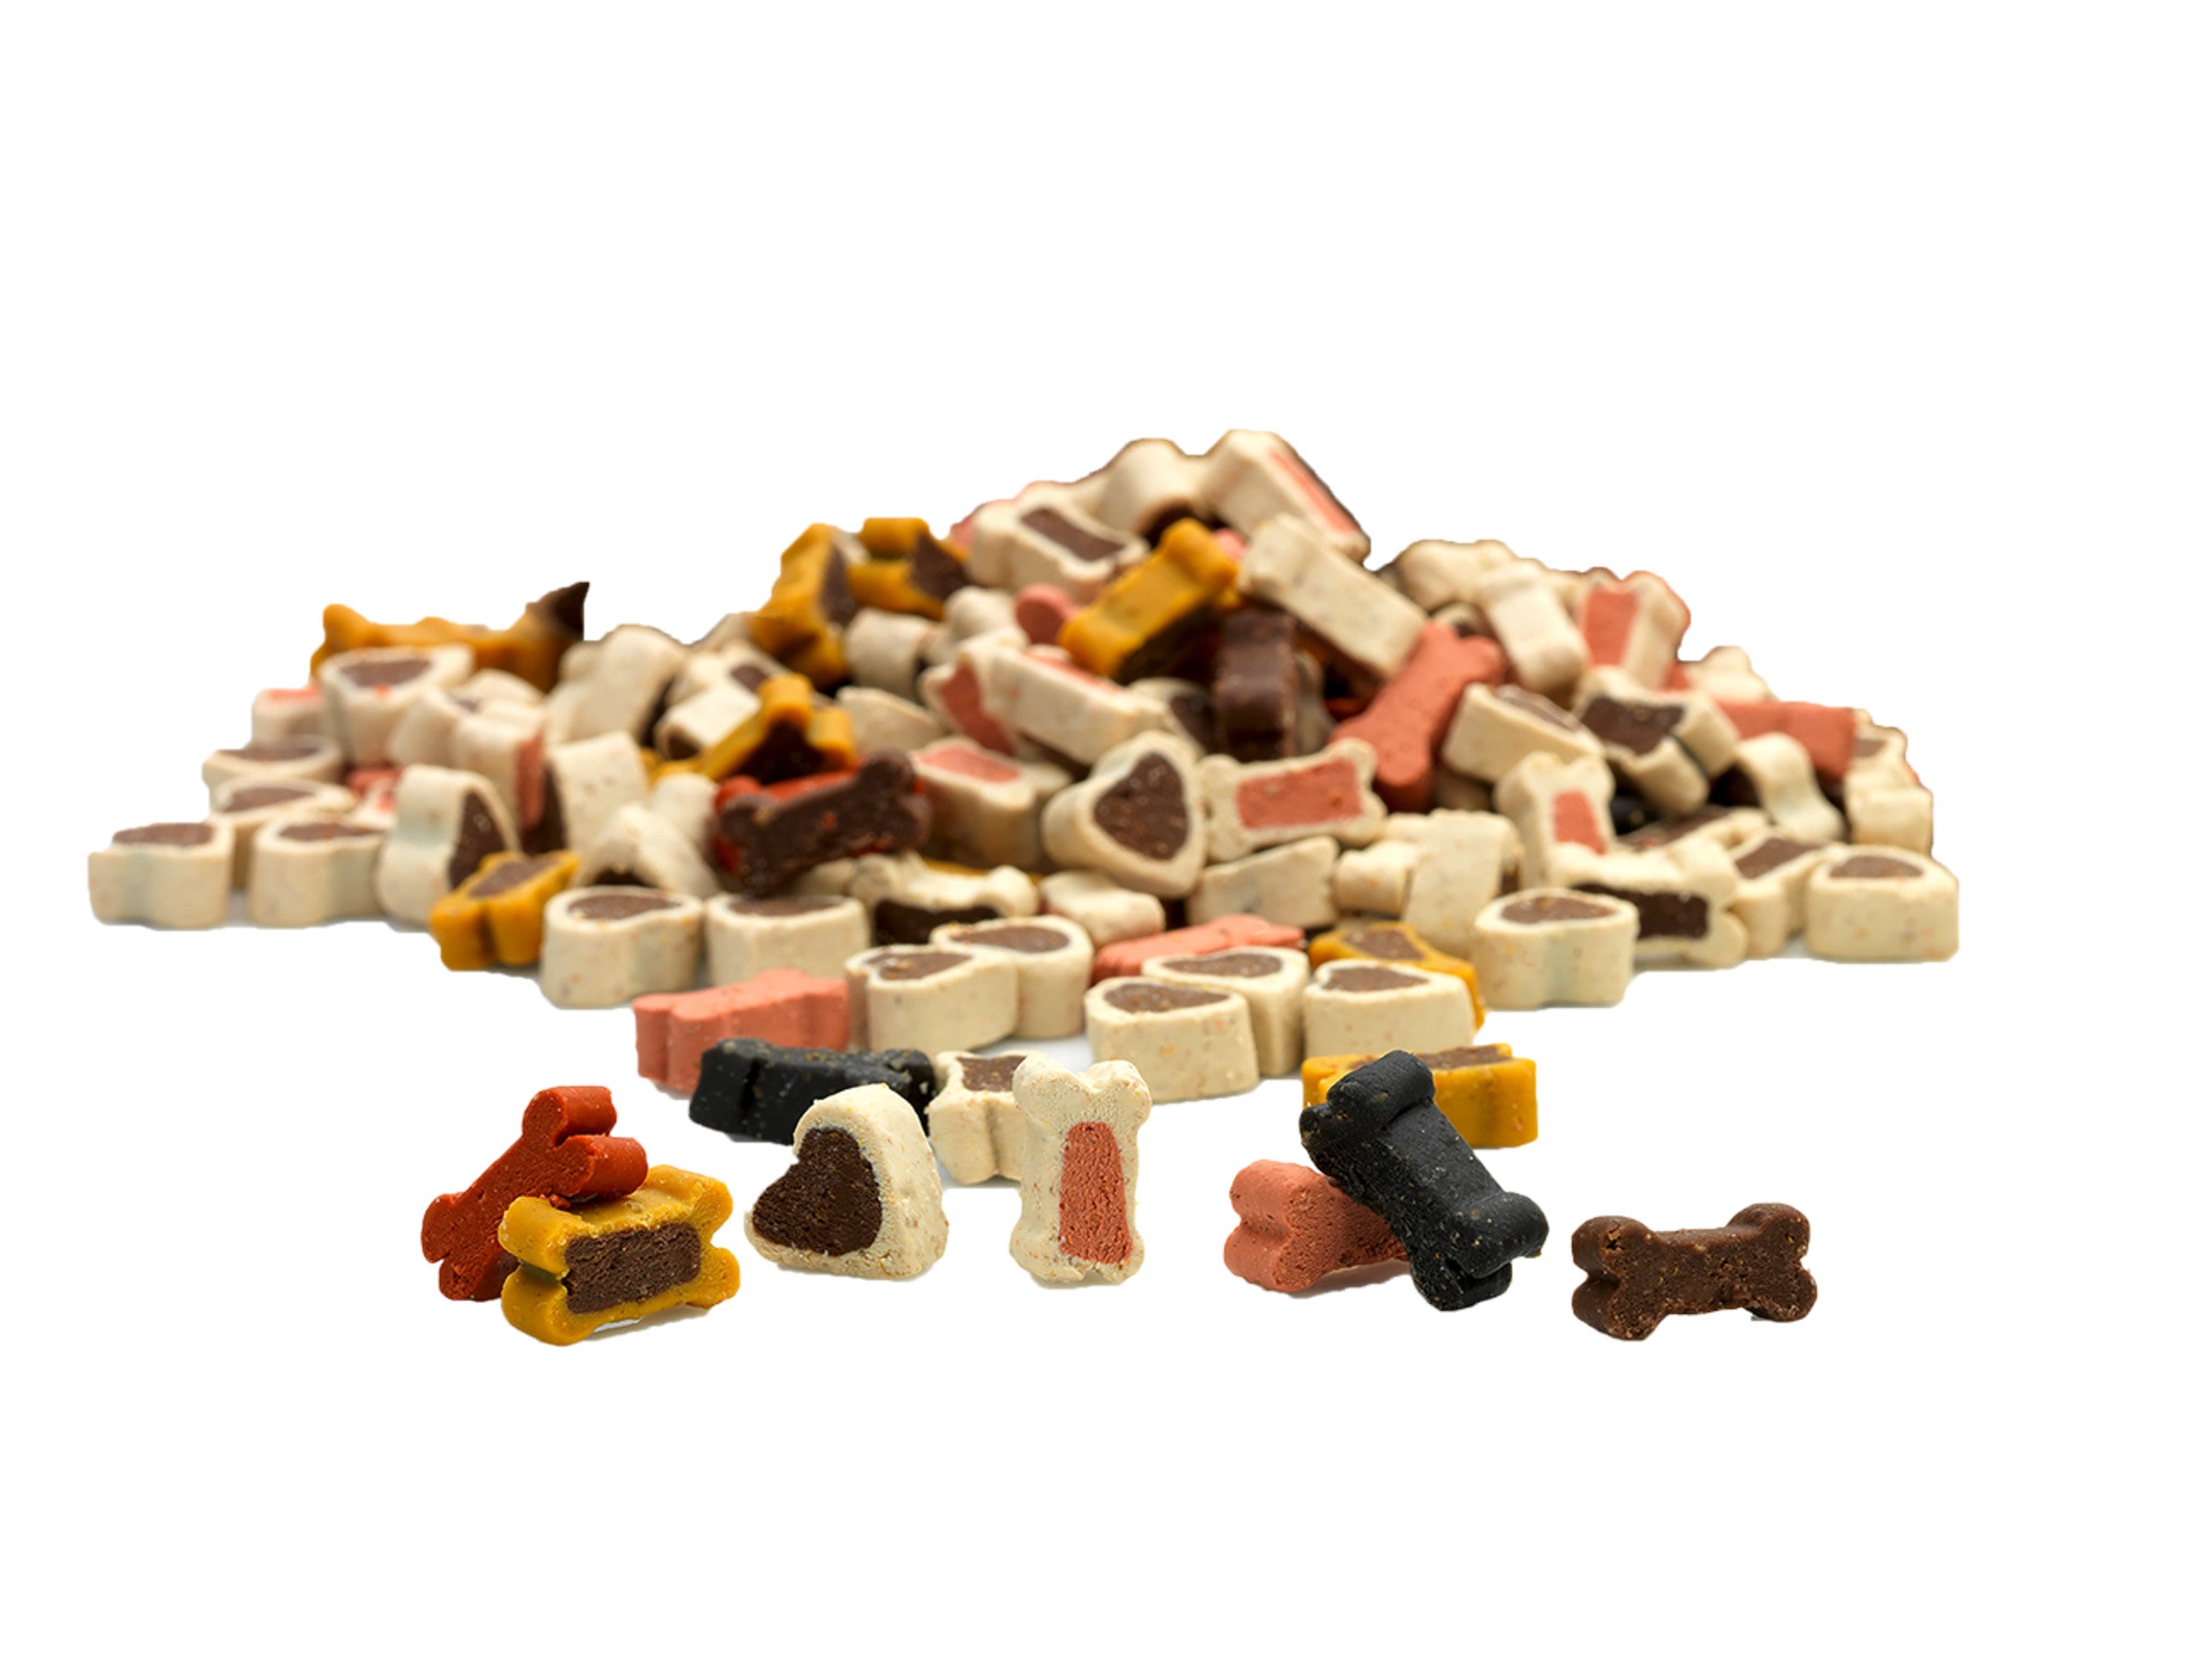 Candy Party Mix 180g - Pip & Pepper by Dierenspeciaalzaak Huysmans